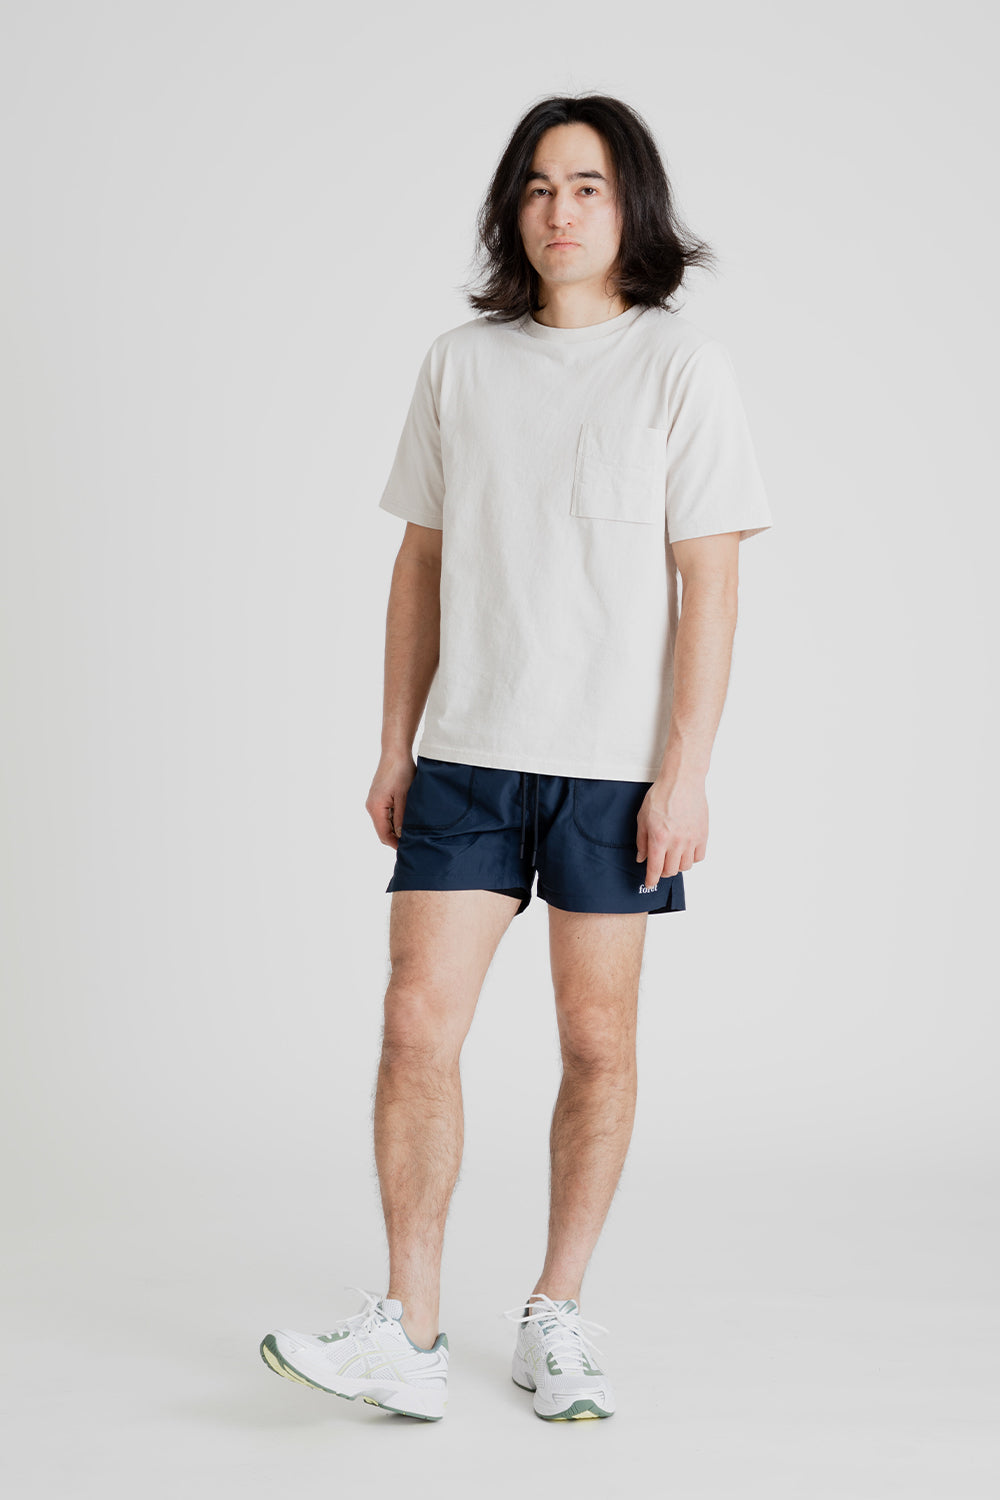 Foret Run Shorts in Navy